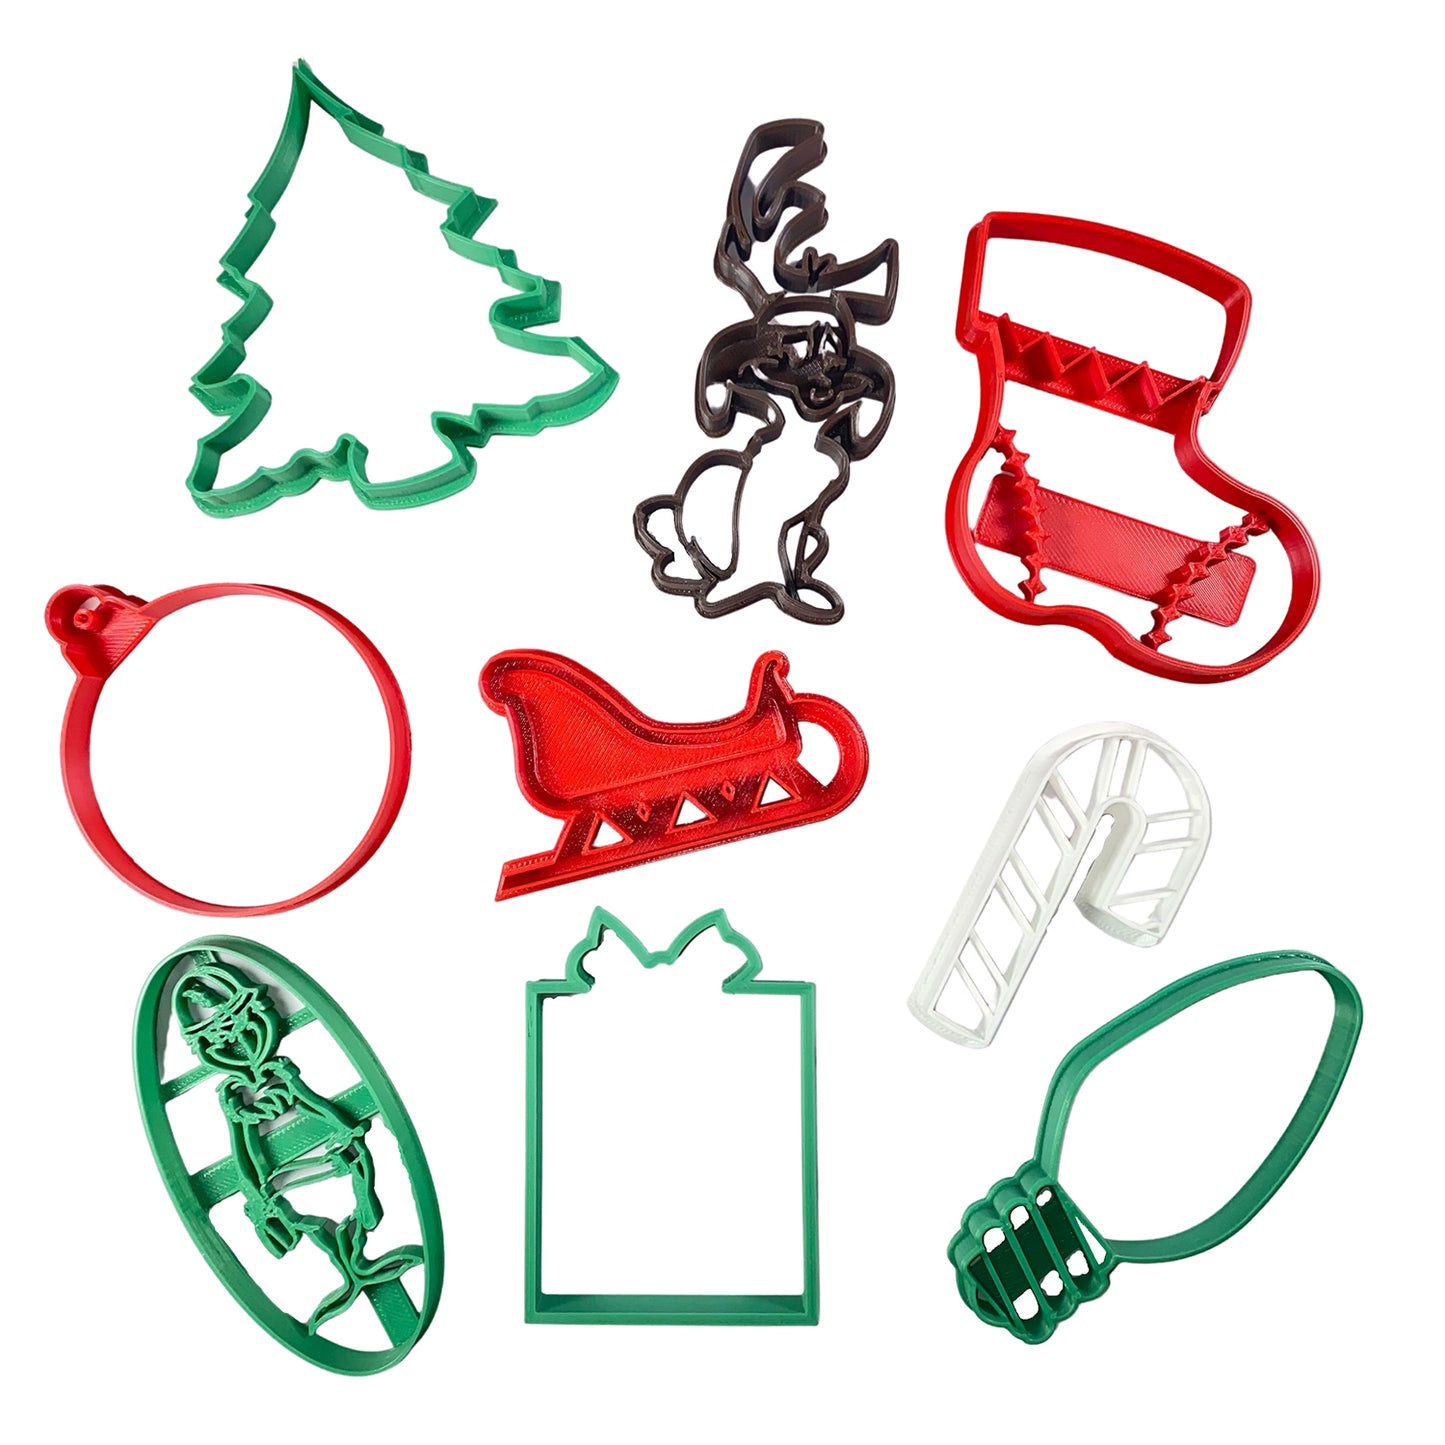 Jolly Green Lineman Holiday Cookie Cutter 9 piece Set - USA Made - Grinch Lineman, Max LinePup Dog, Christmas Tree, Christmas Twinkle Bulb Light, Holiday Ornament, Stocking, Present, Candy Cane, Sleigh